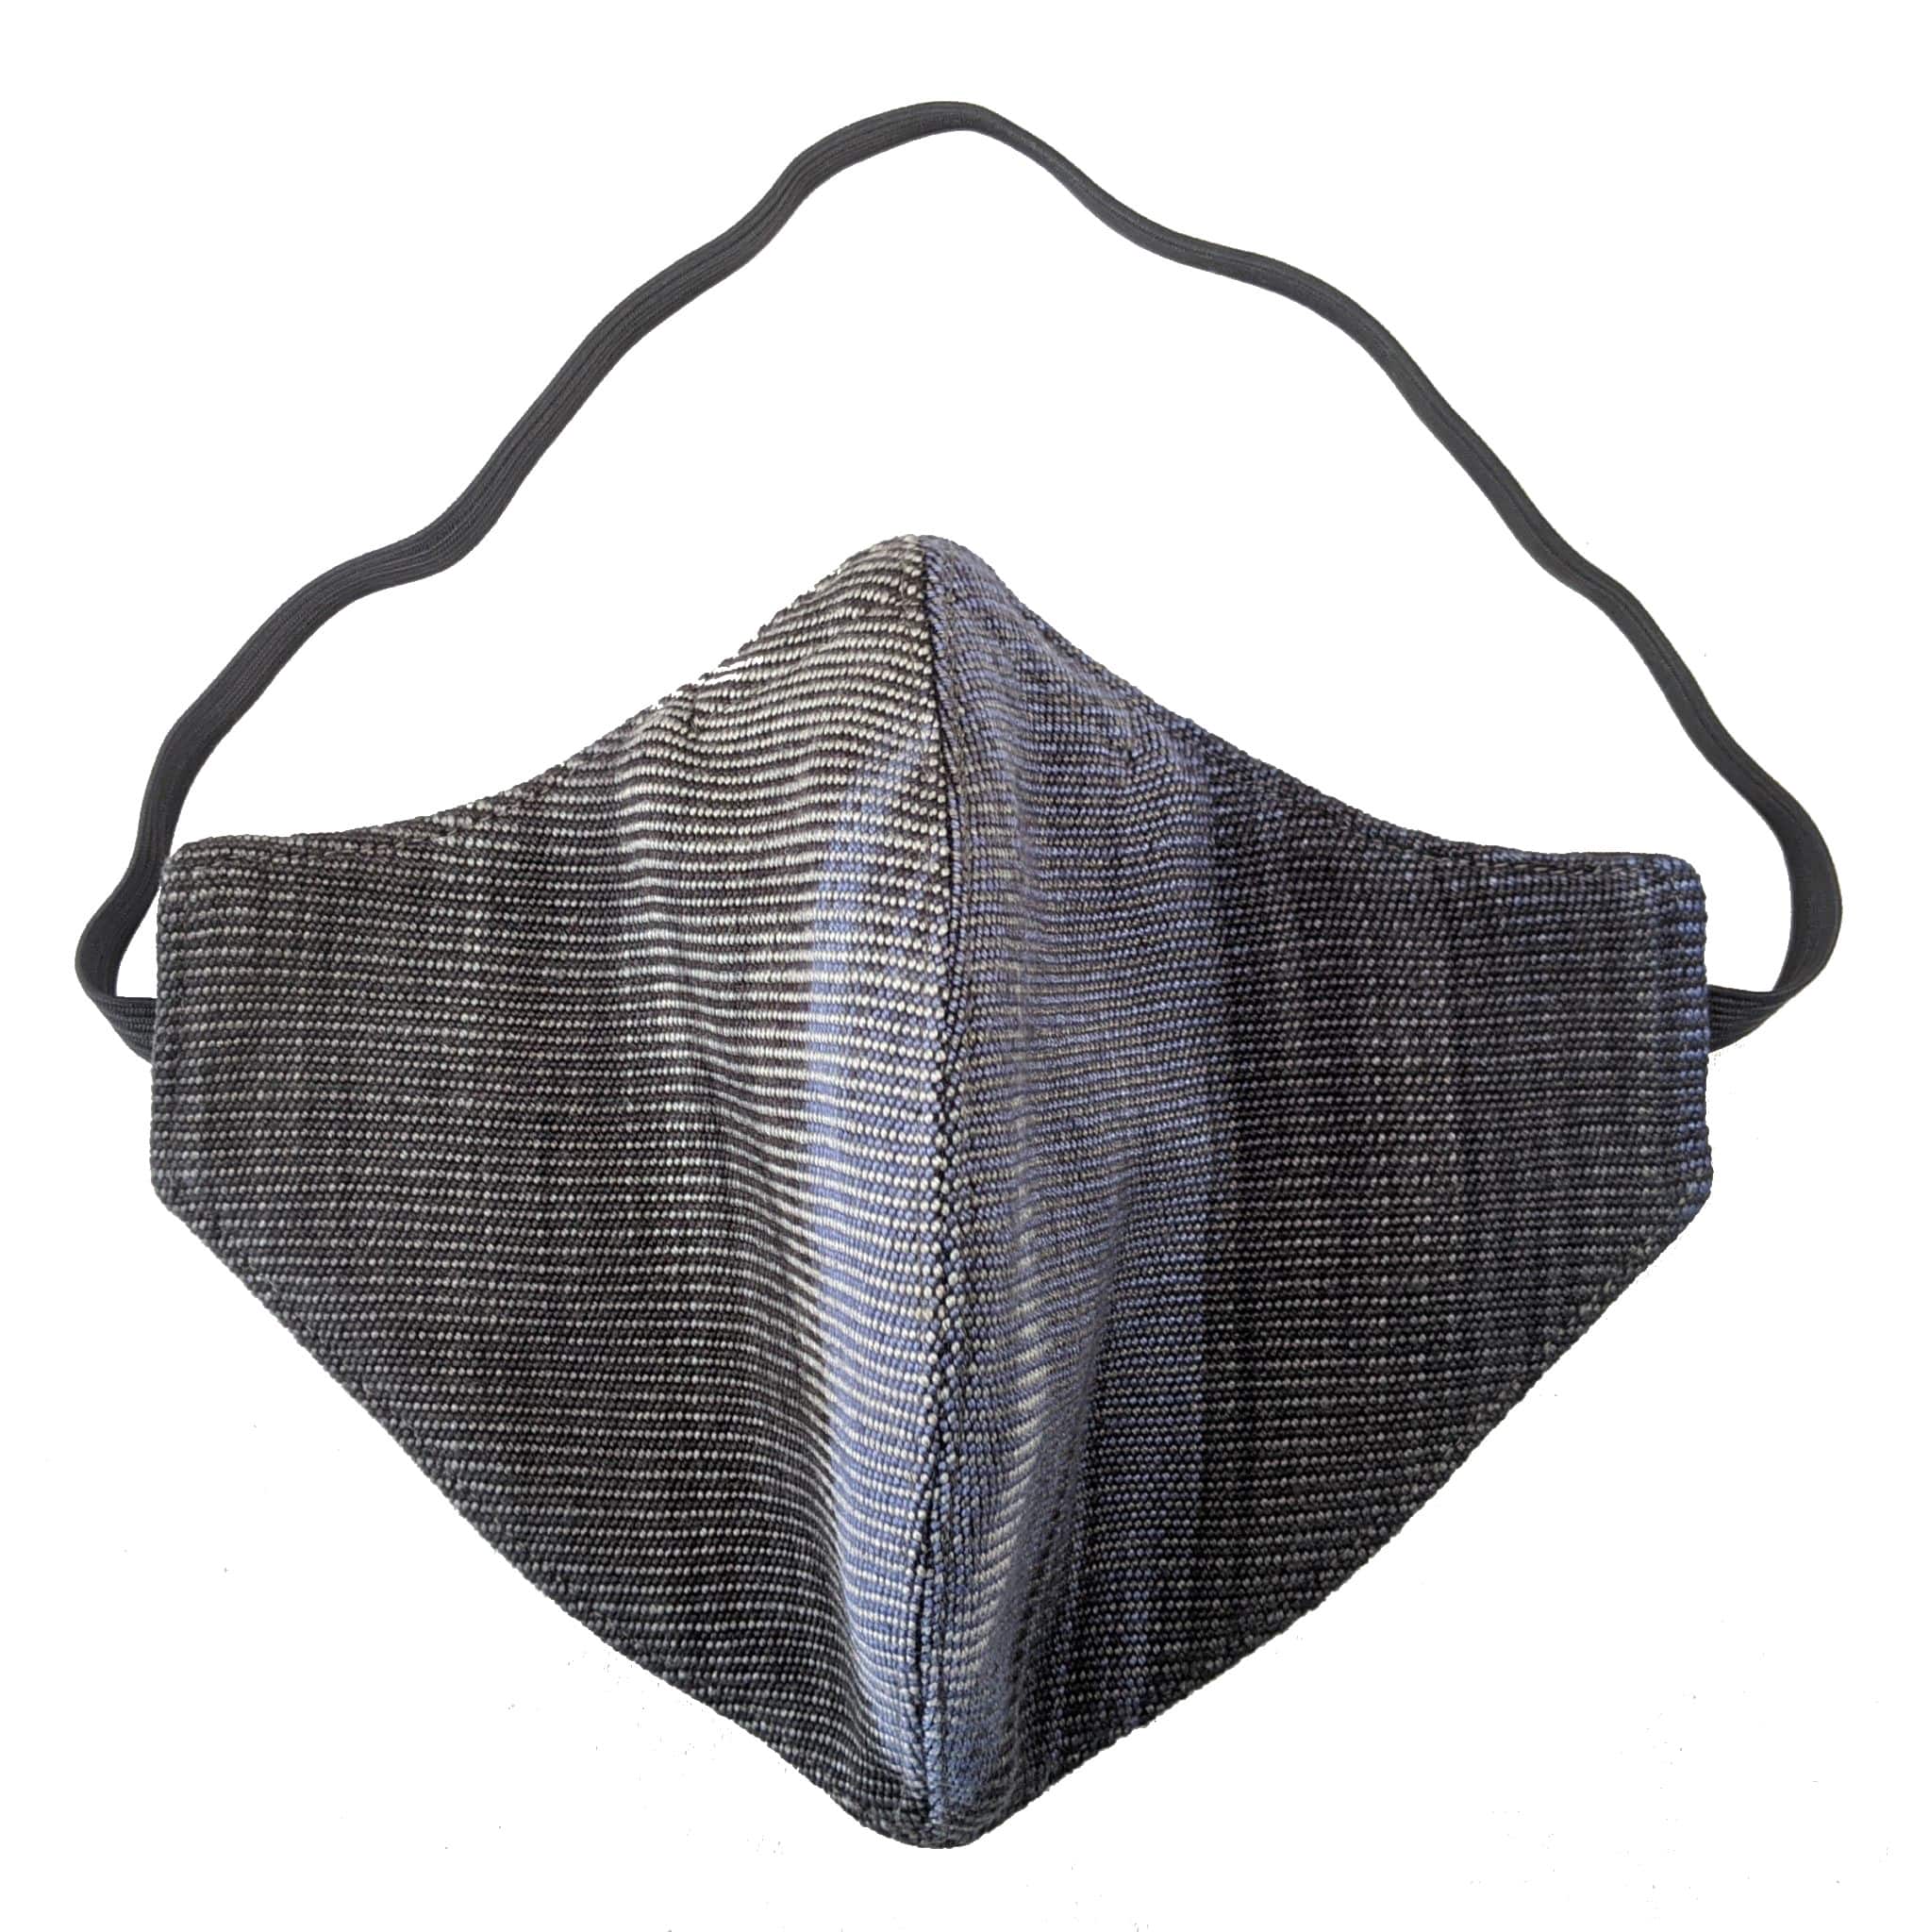 Handwoven Lightweight Bamboo Face Mask with Elastic Behind Head - Blue, Grays, Black 